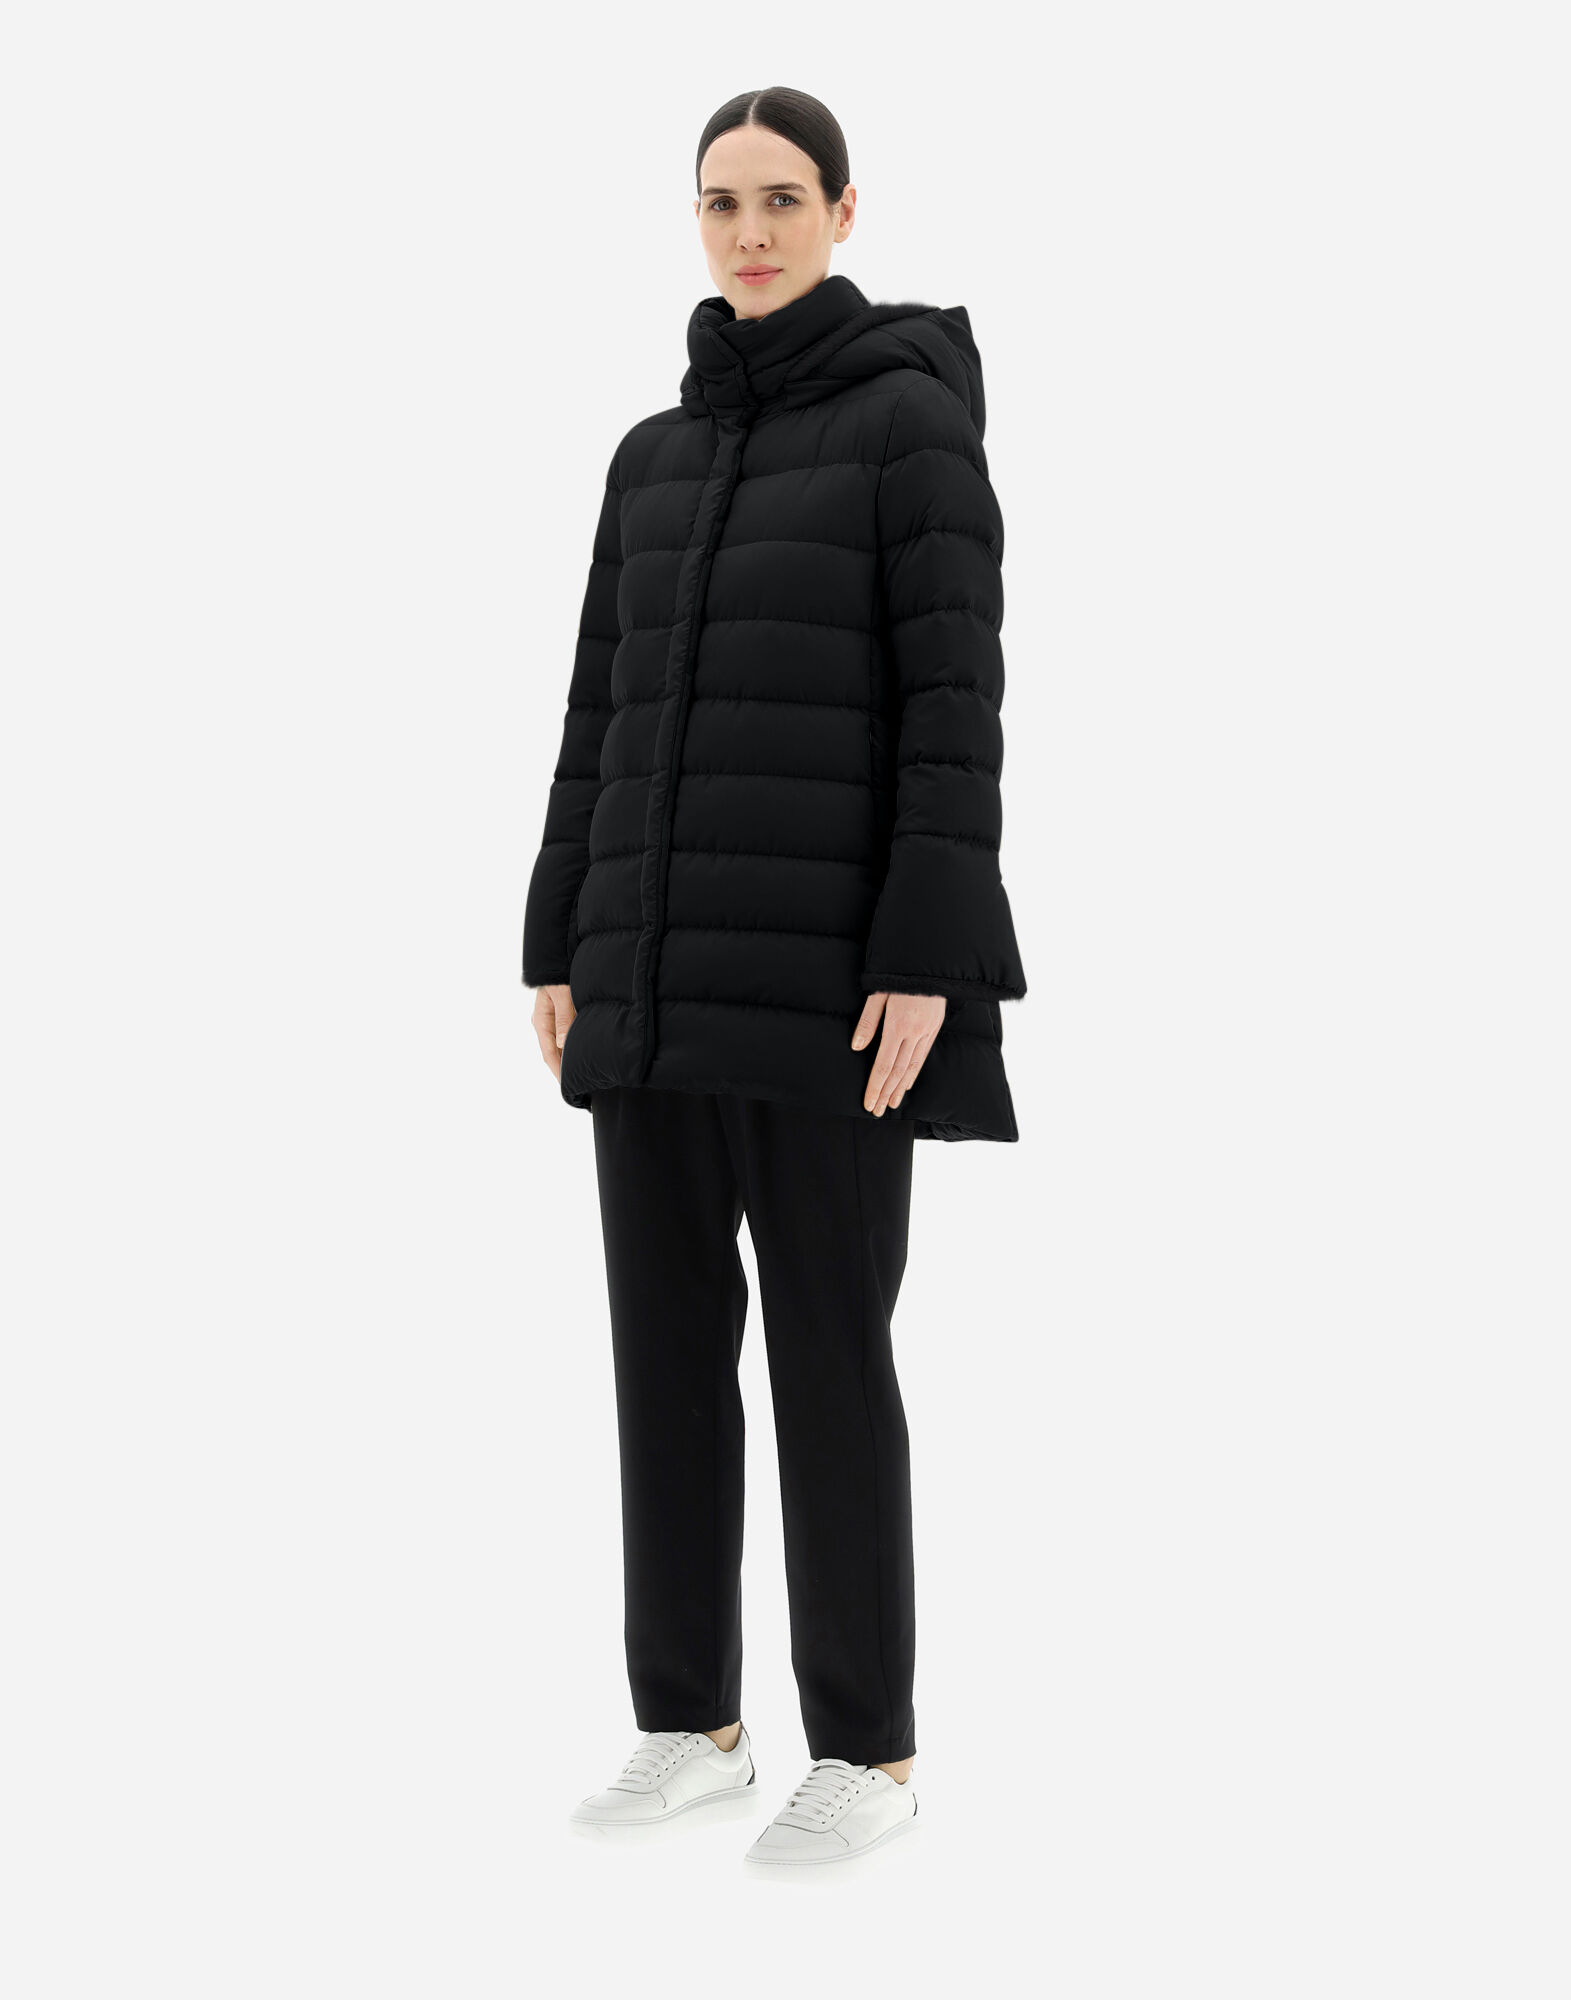 ARENDELLE AND LADY FAUX FUR A-LINE JACKET in Black for Women | Herno®